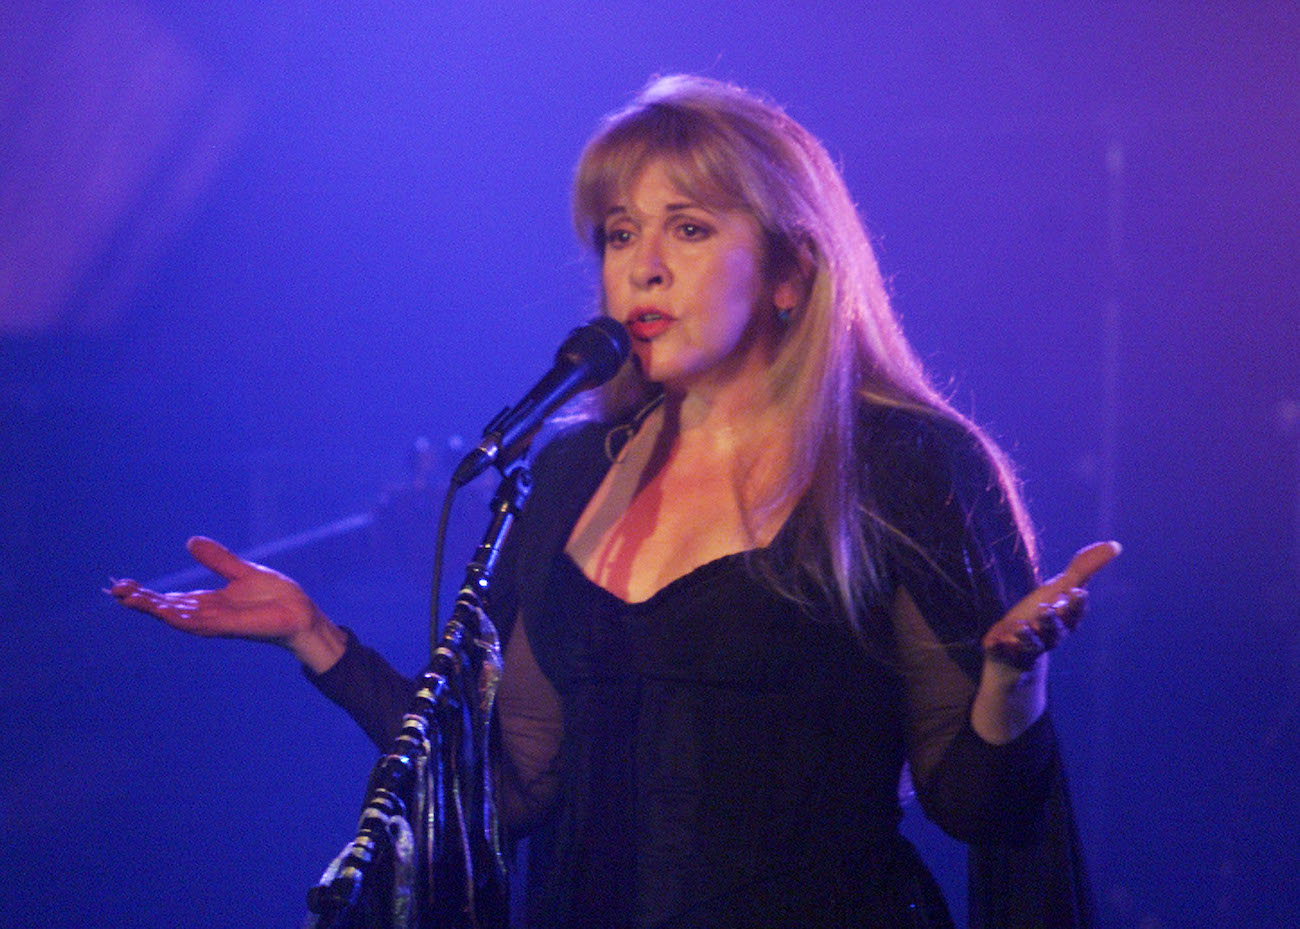 Stevie Nicks performing during a private show to introduce her 2001 album 'Trouble in Shangri-la.'